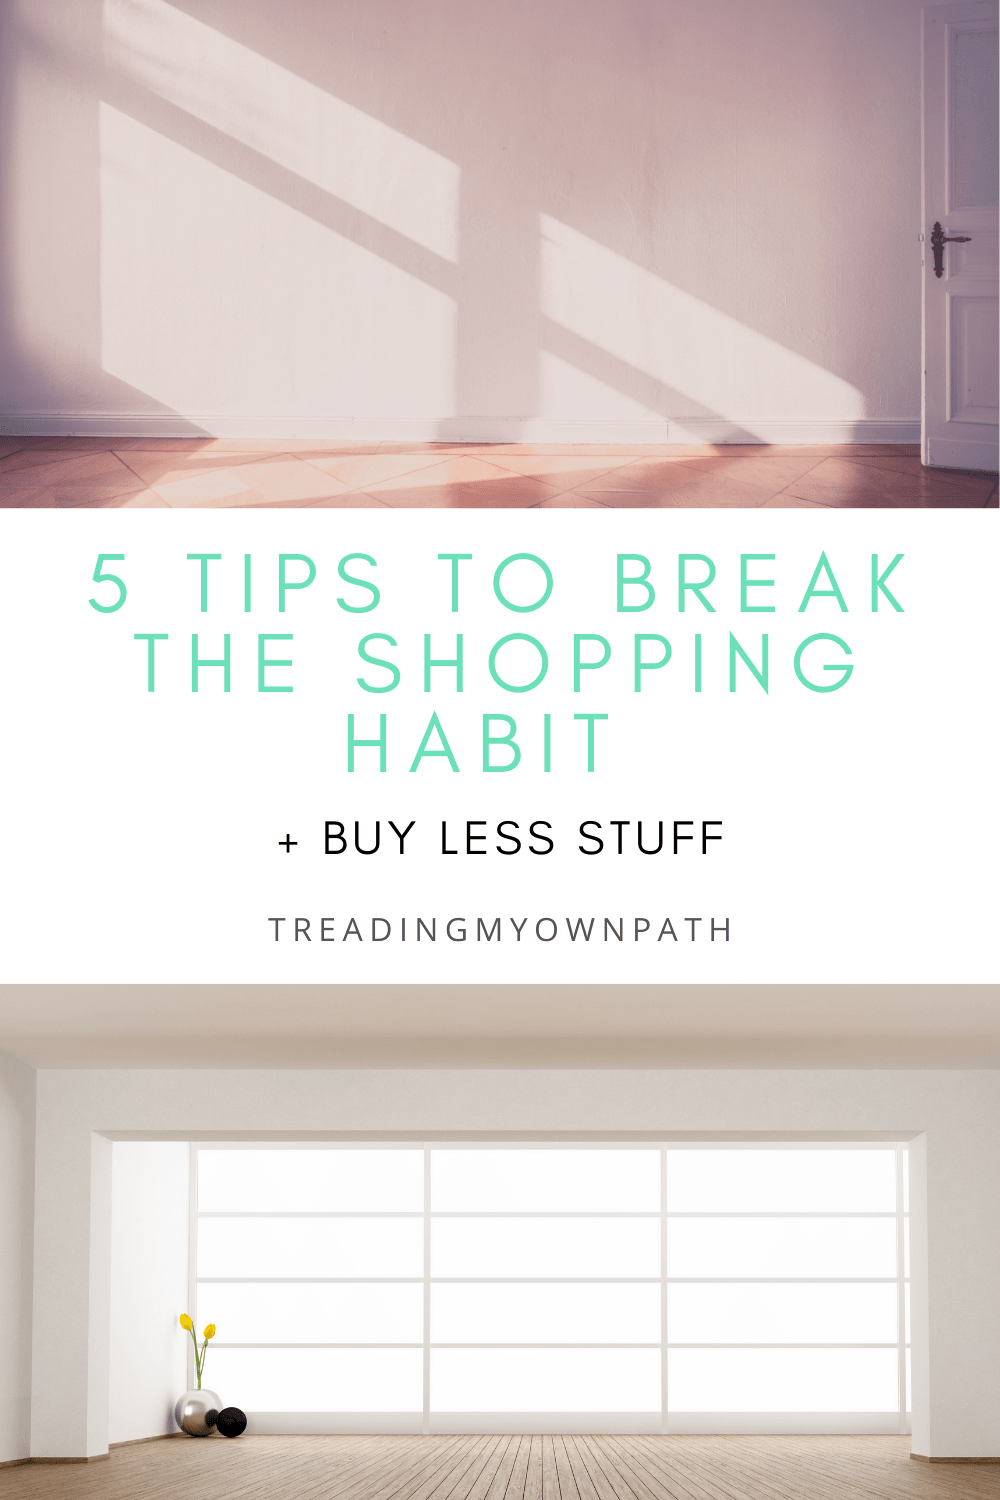 Not buying it: 5 tips for buying less stuff